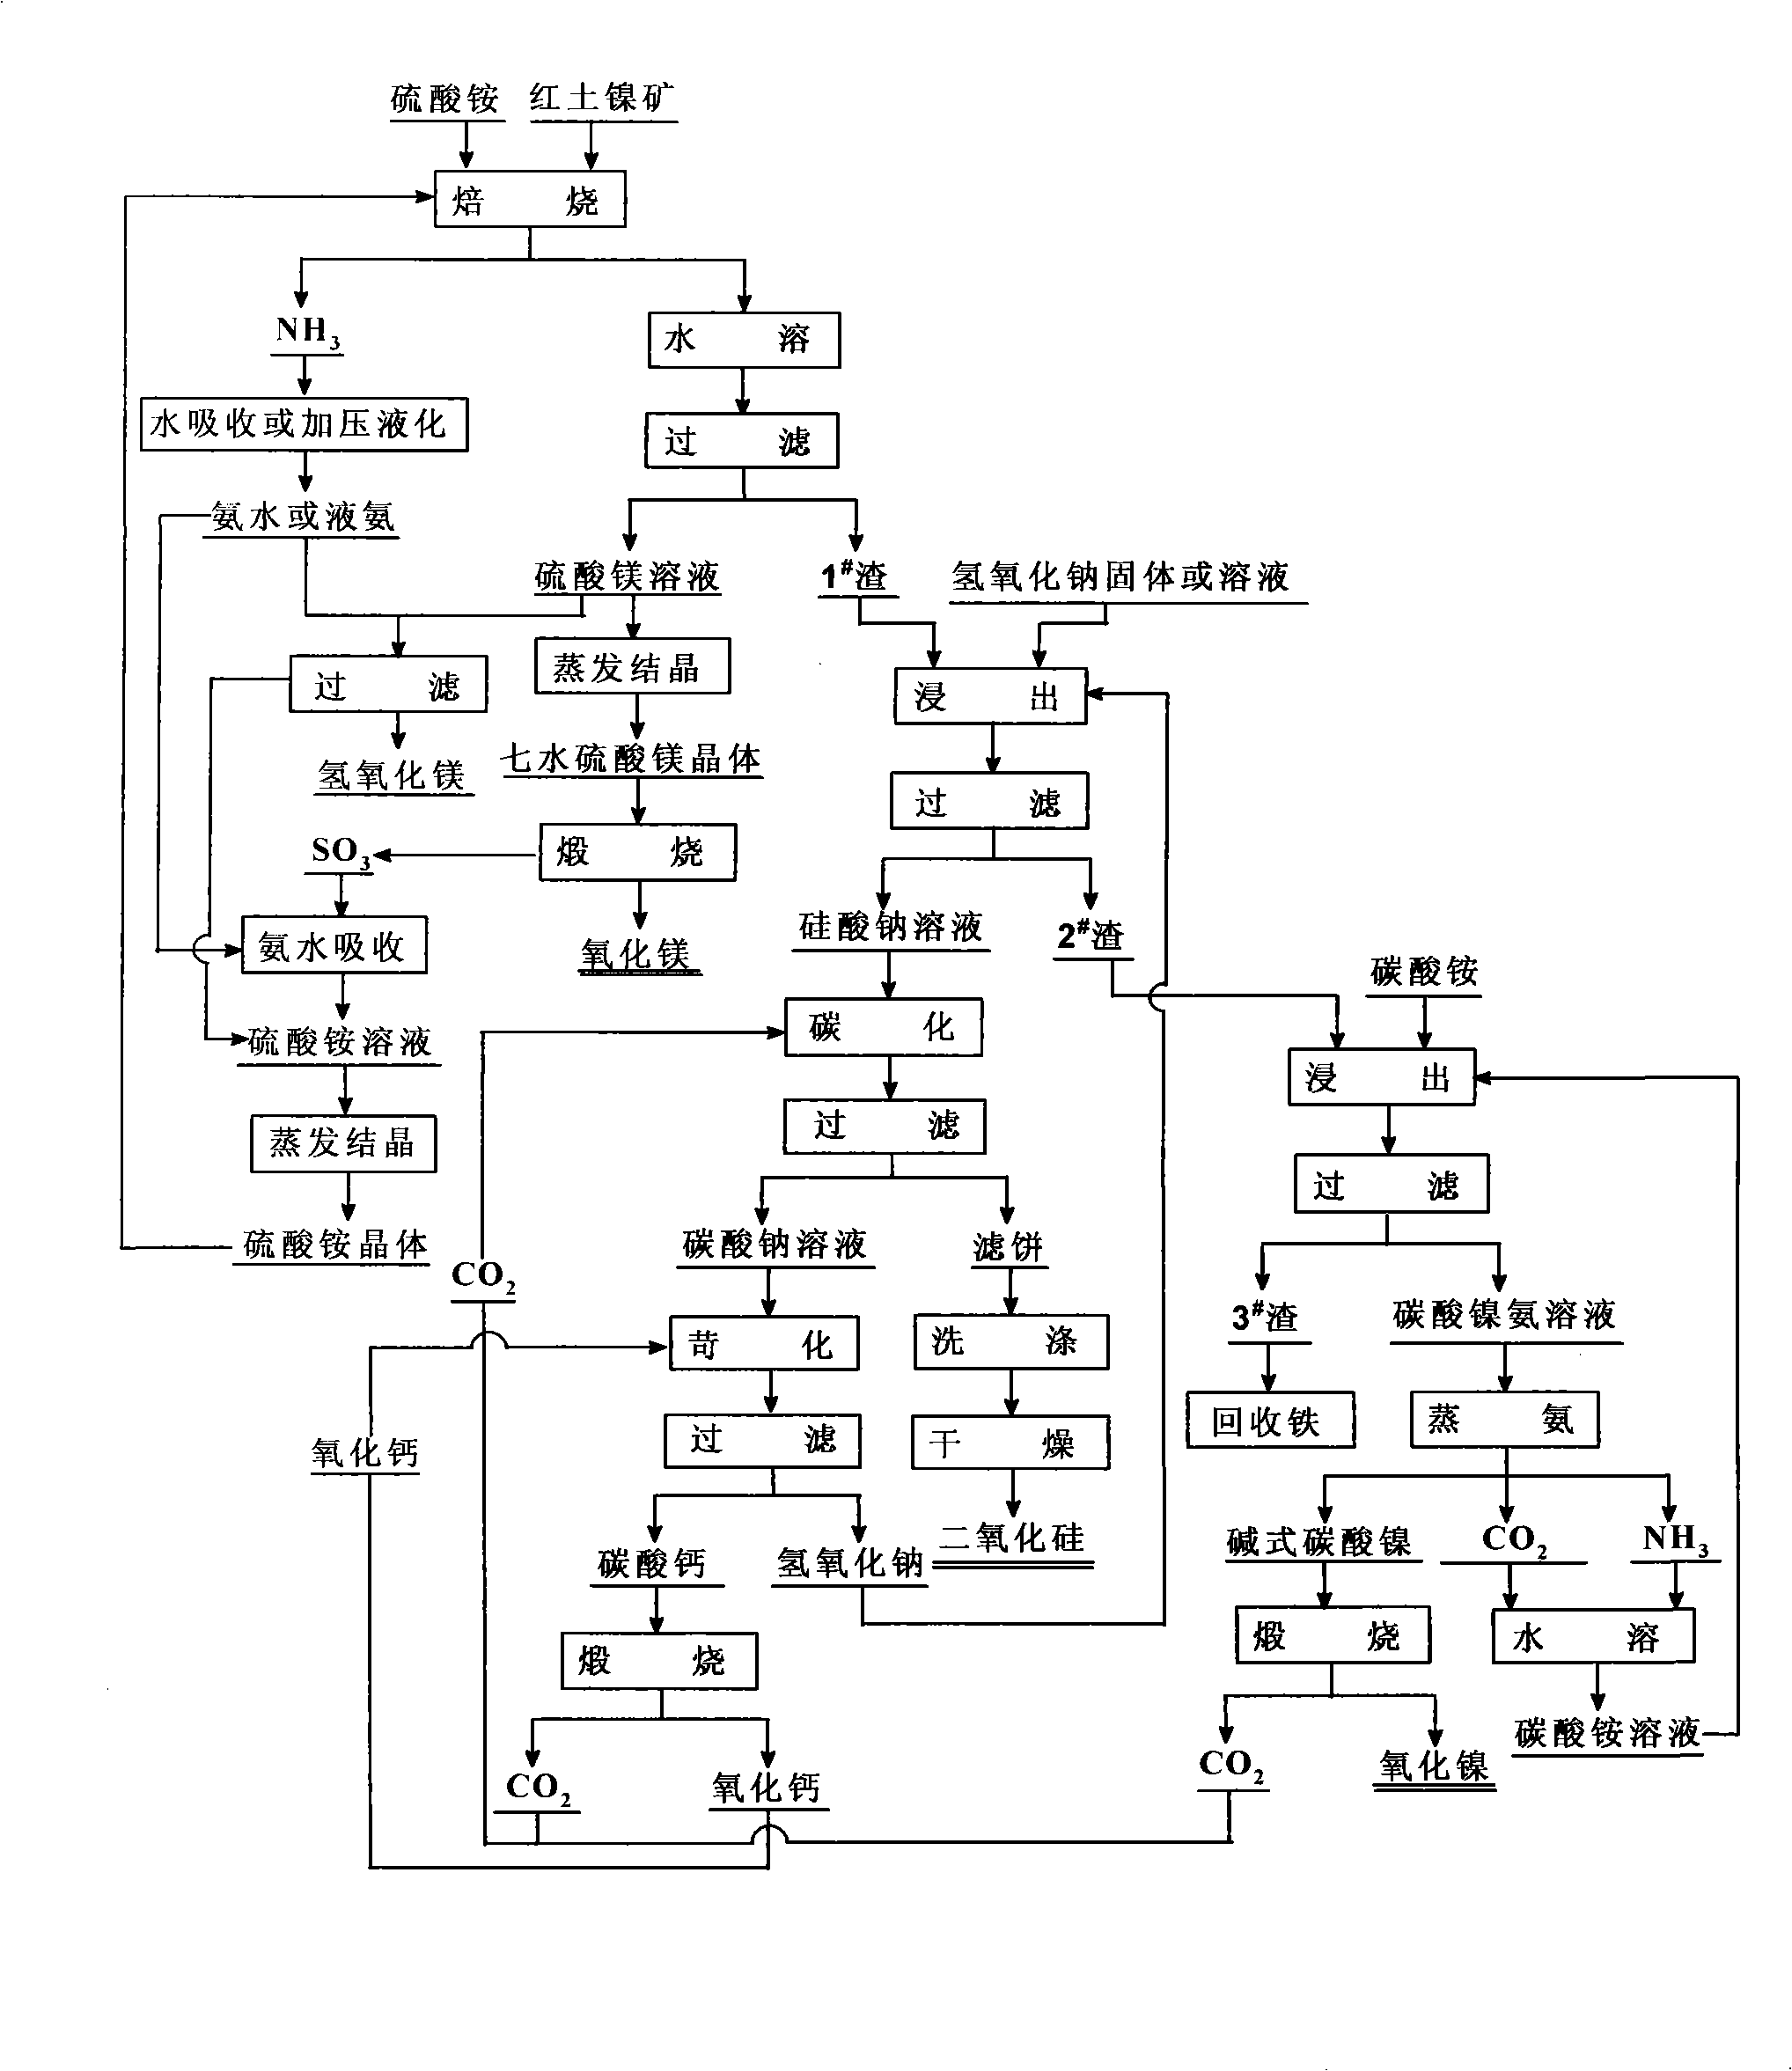 Method for preparing magnesia, silicon dioxide and nickel oxide products from lateritic nickel ore